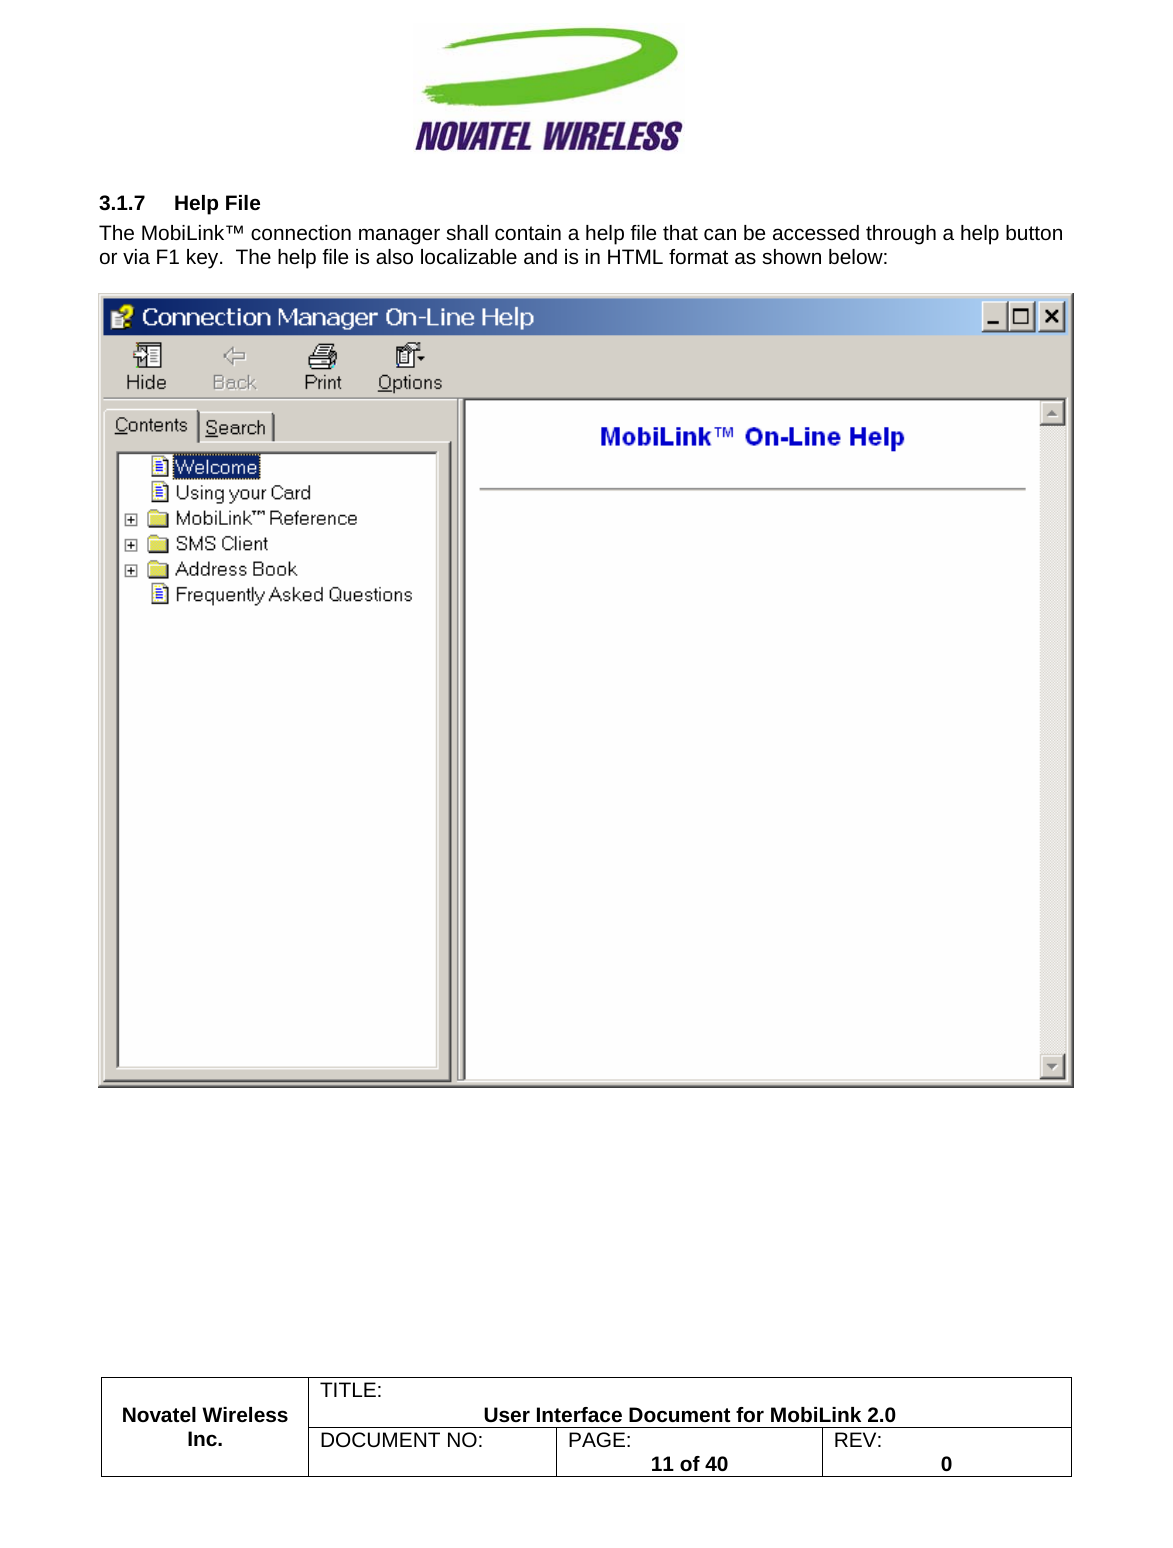                                                         TITLE:  User Interface Document for MobiLink 2.0 3.1.7 Help File The MobiLink™ connection manager shall contain a help file that can be accessed through a help button or via F1 key.  The help file is also localizable and is in HTML format as shown below:    Novatel Wireless  Inc. DOCUMENT NO:  PAGE:   11 of 40  REV:  0    